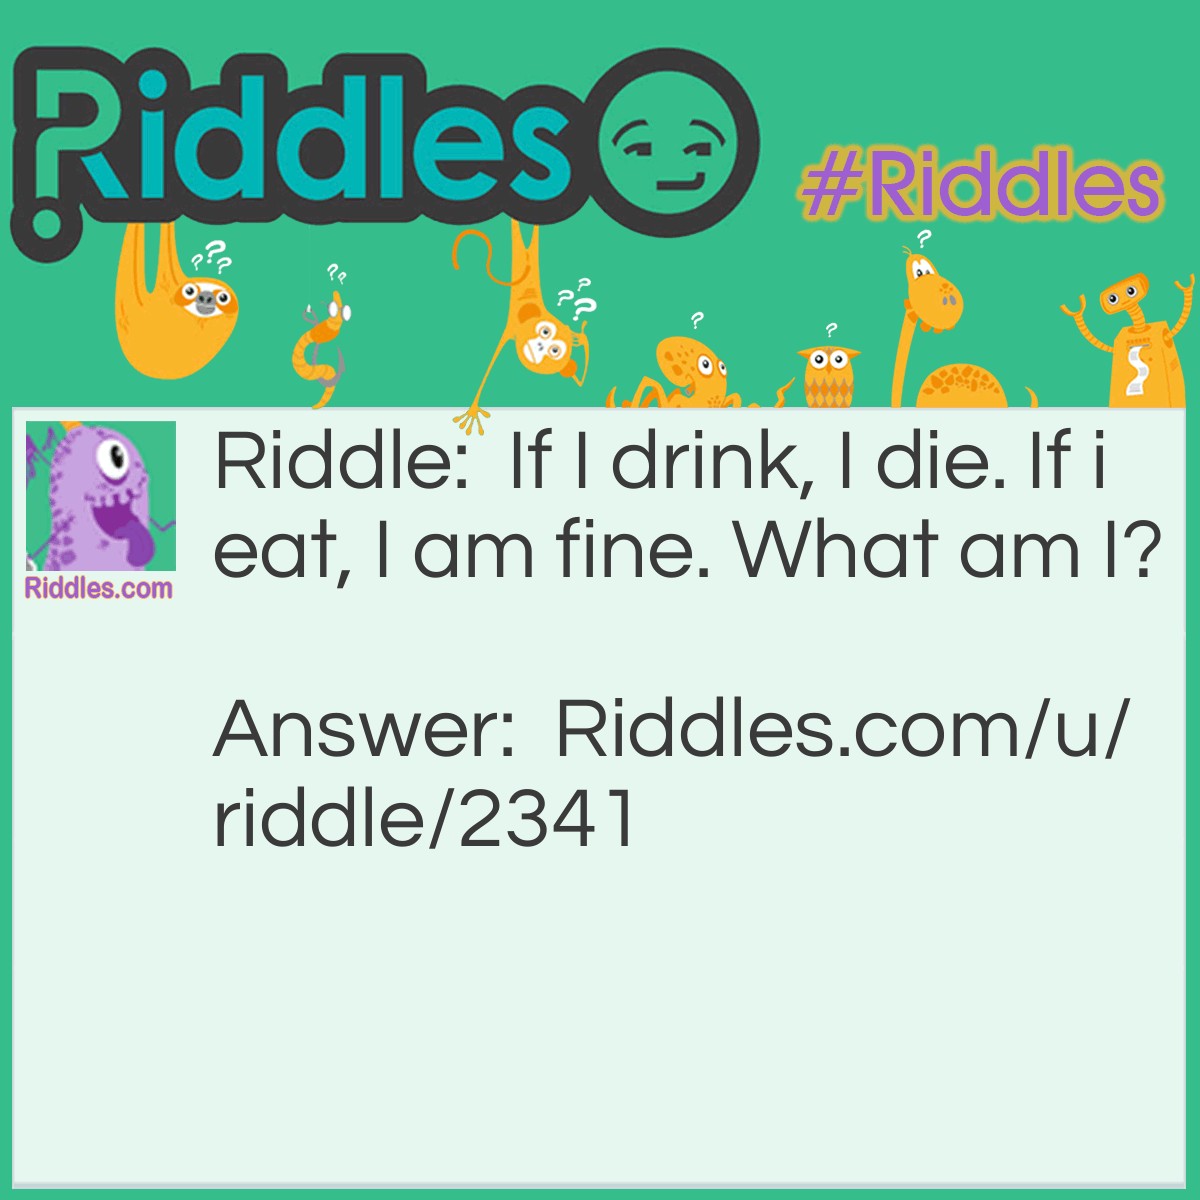 Riddle: If I drink, I die. If i eat, I am fine. What am I? Answer: A fire.